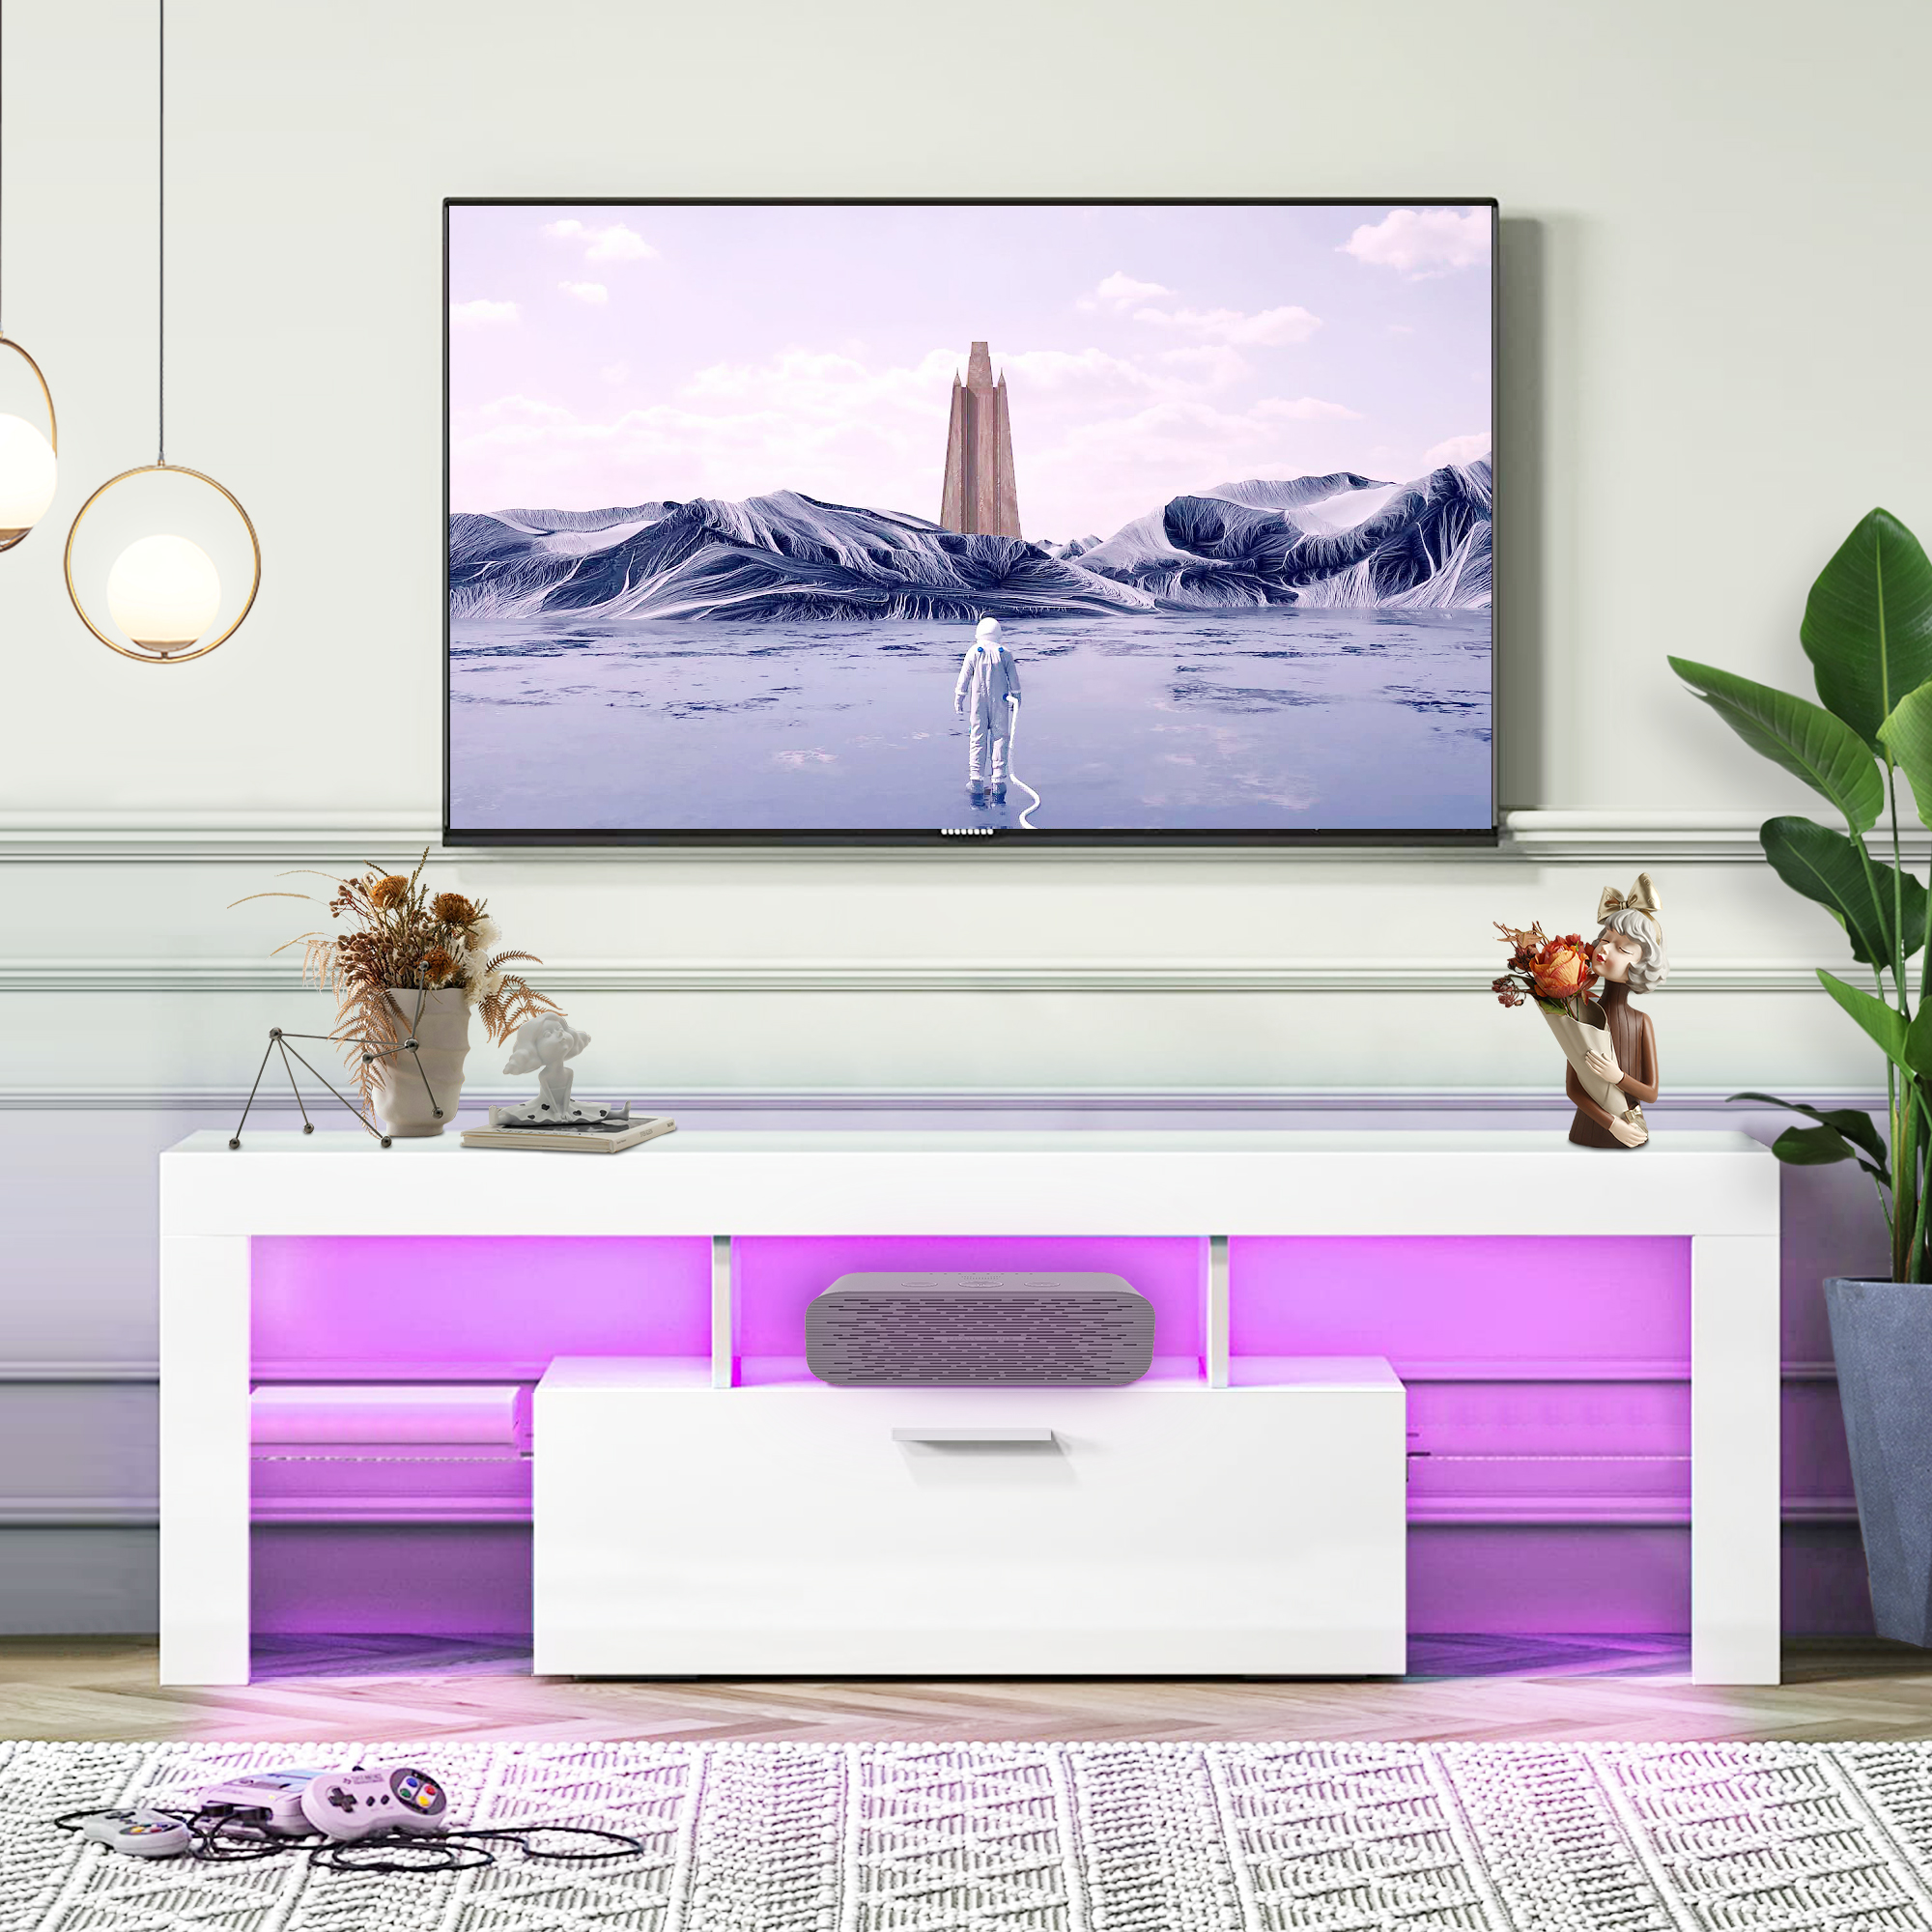 uhomepro TV Stand for TVs up to 55", Living Room Entertainment Center with RGB LED Lights and Storage Shelves Furniture, White High Gloss TV Cabinet Console Table - image 2 of 11